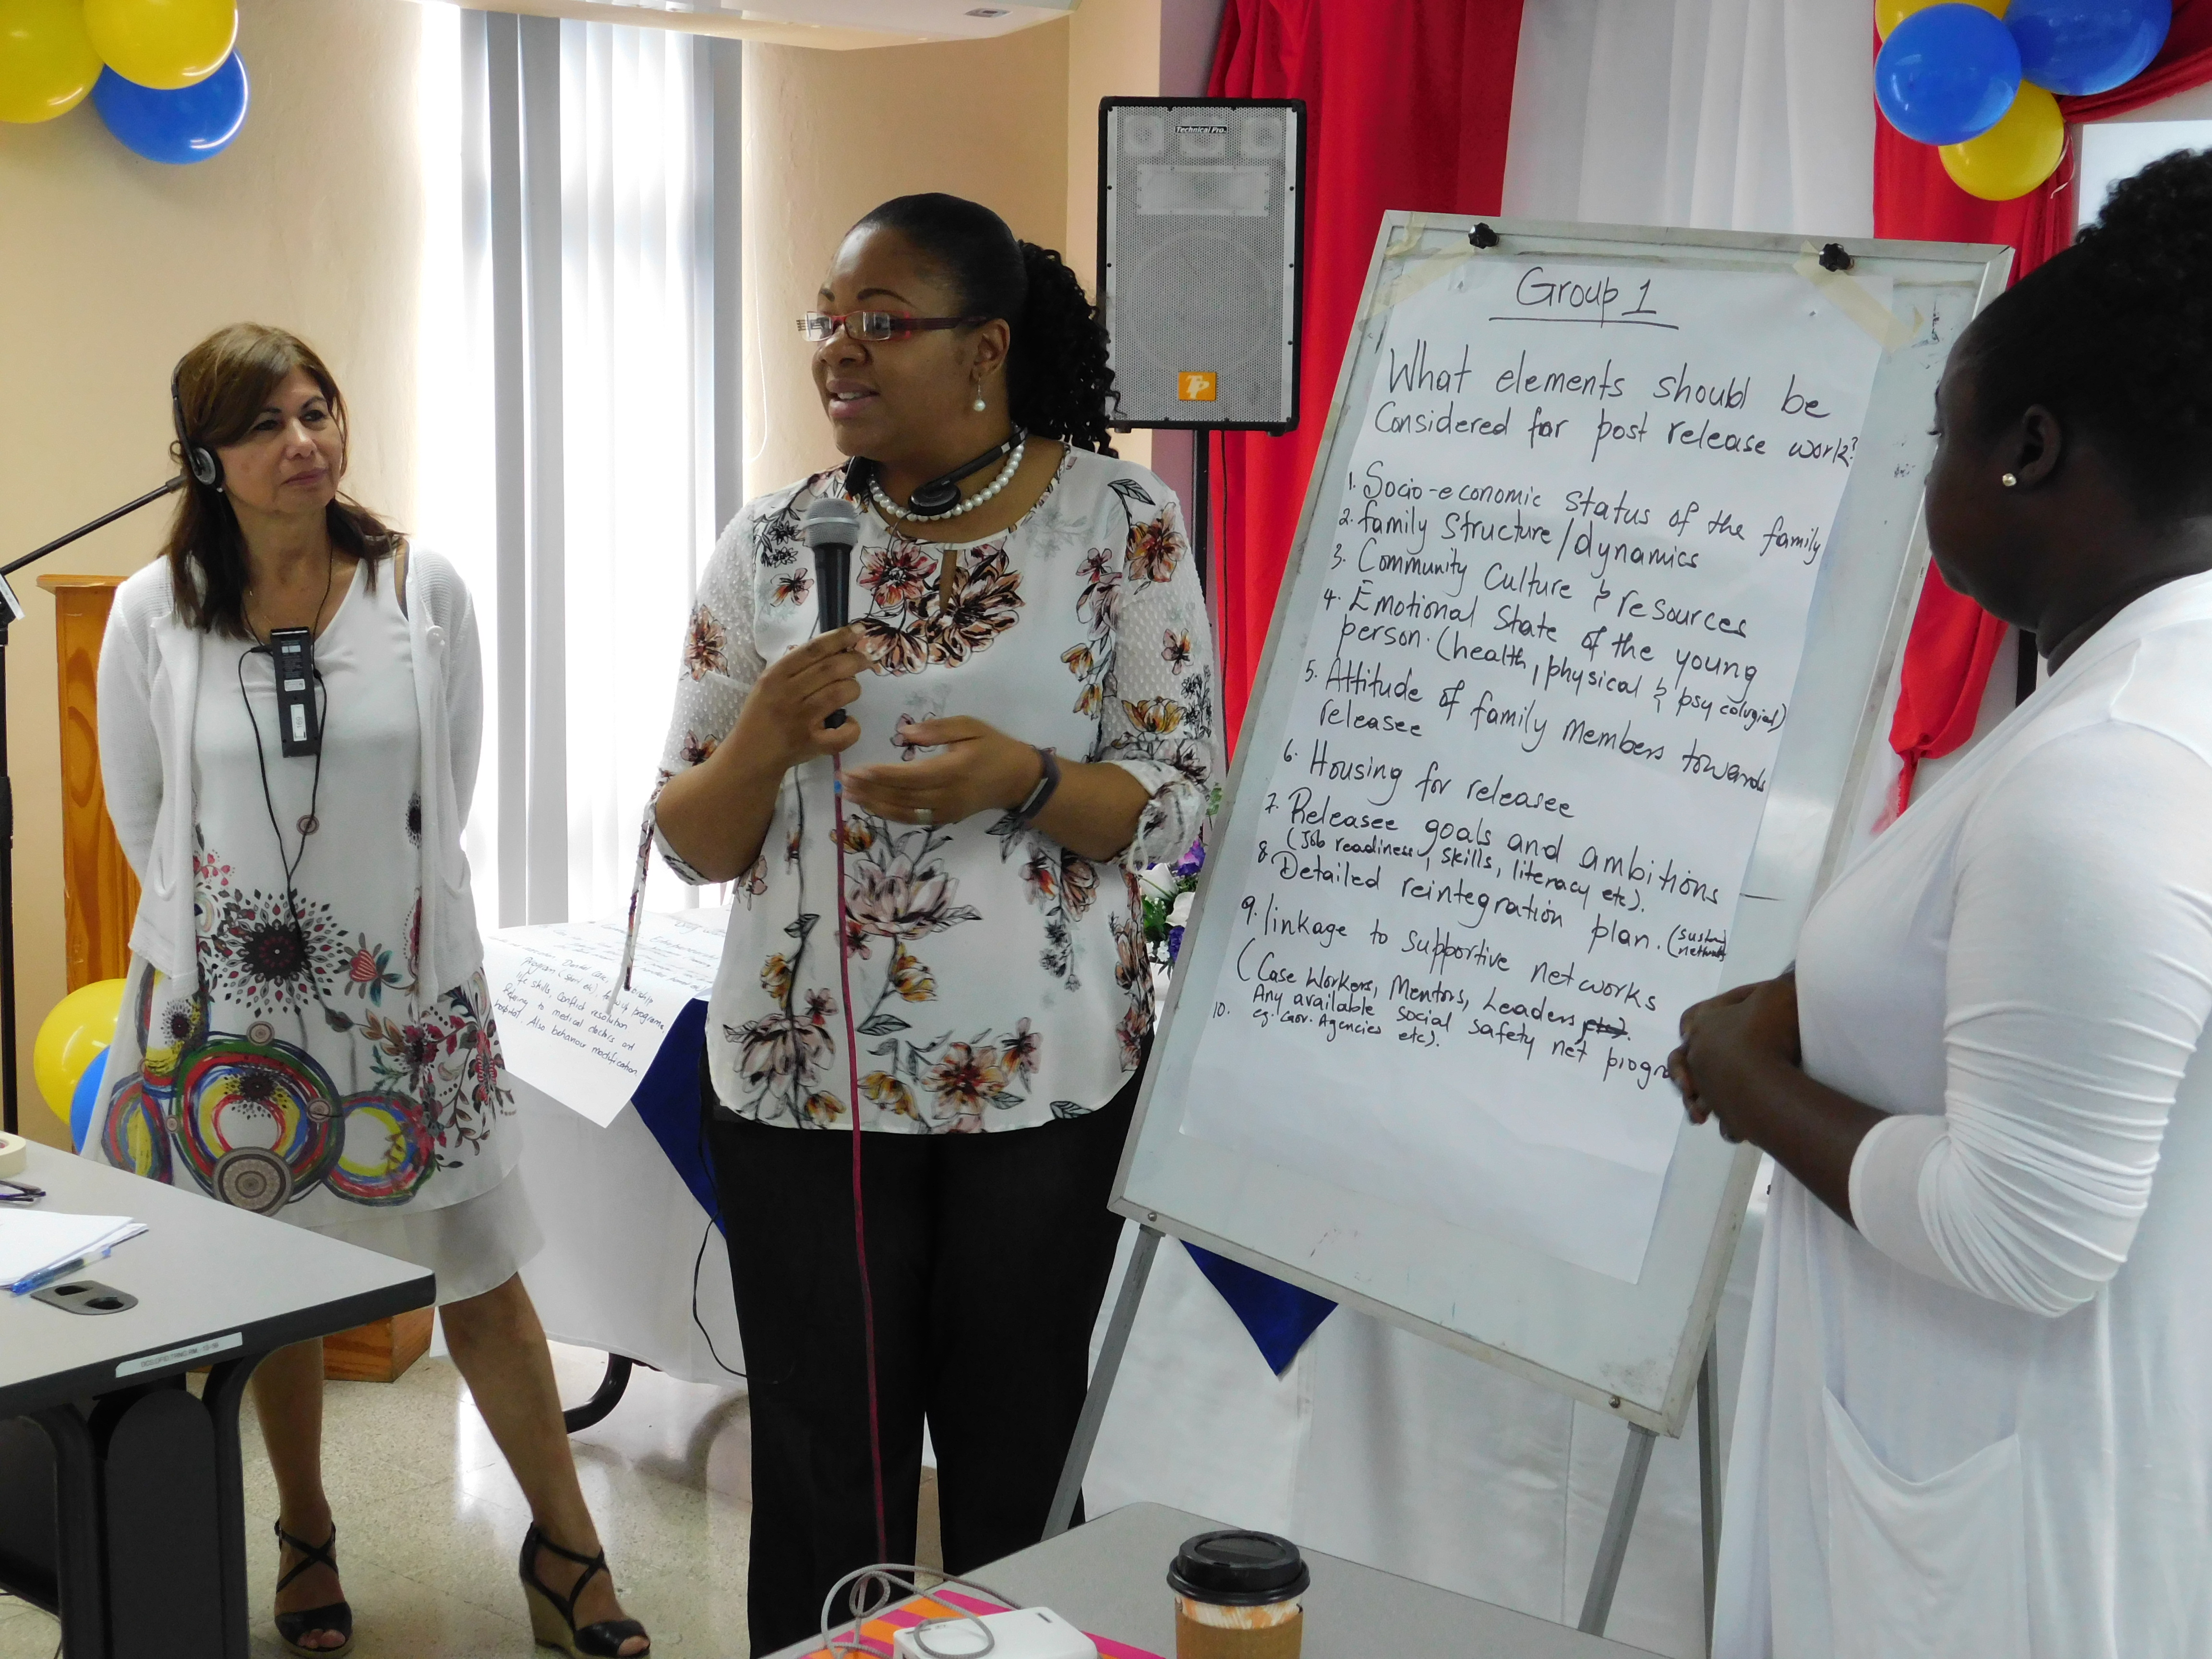 OAS New Path/SENAME Workshop on post-release services to Jamaican youth(January 22, 2019)